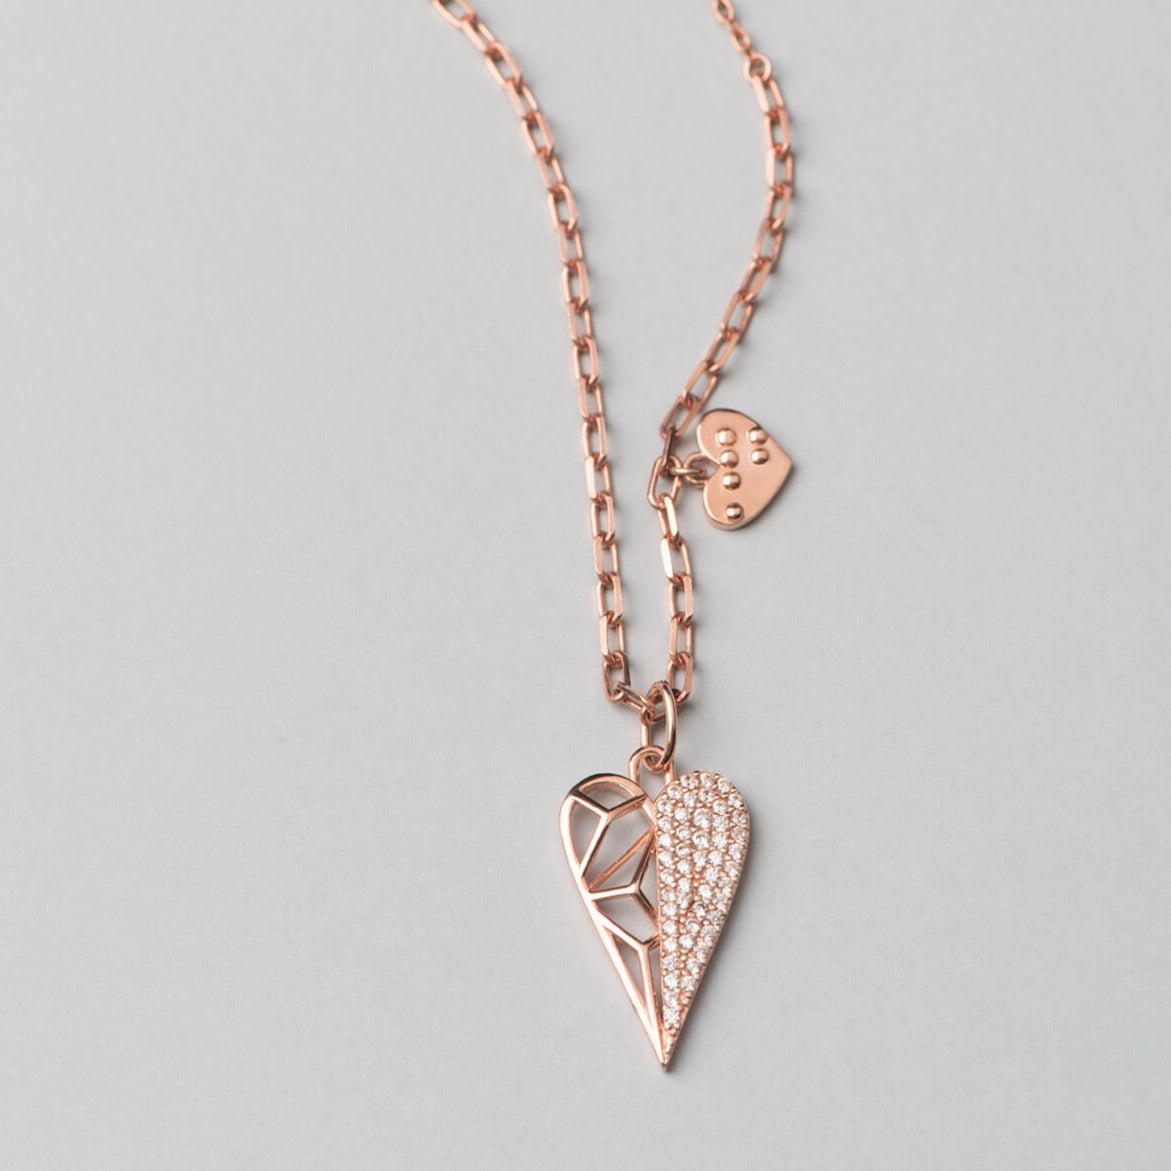 Rose gold plated, 925 sterling silver  necklace with heart pendant. Half of the pendant is decorated with white zirconia stones.